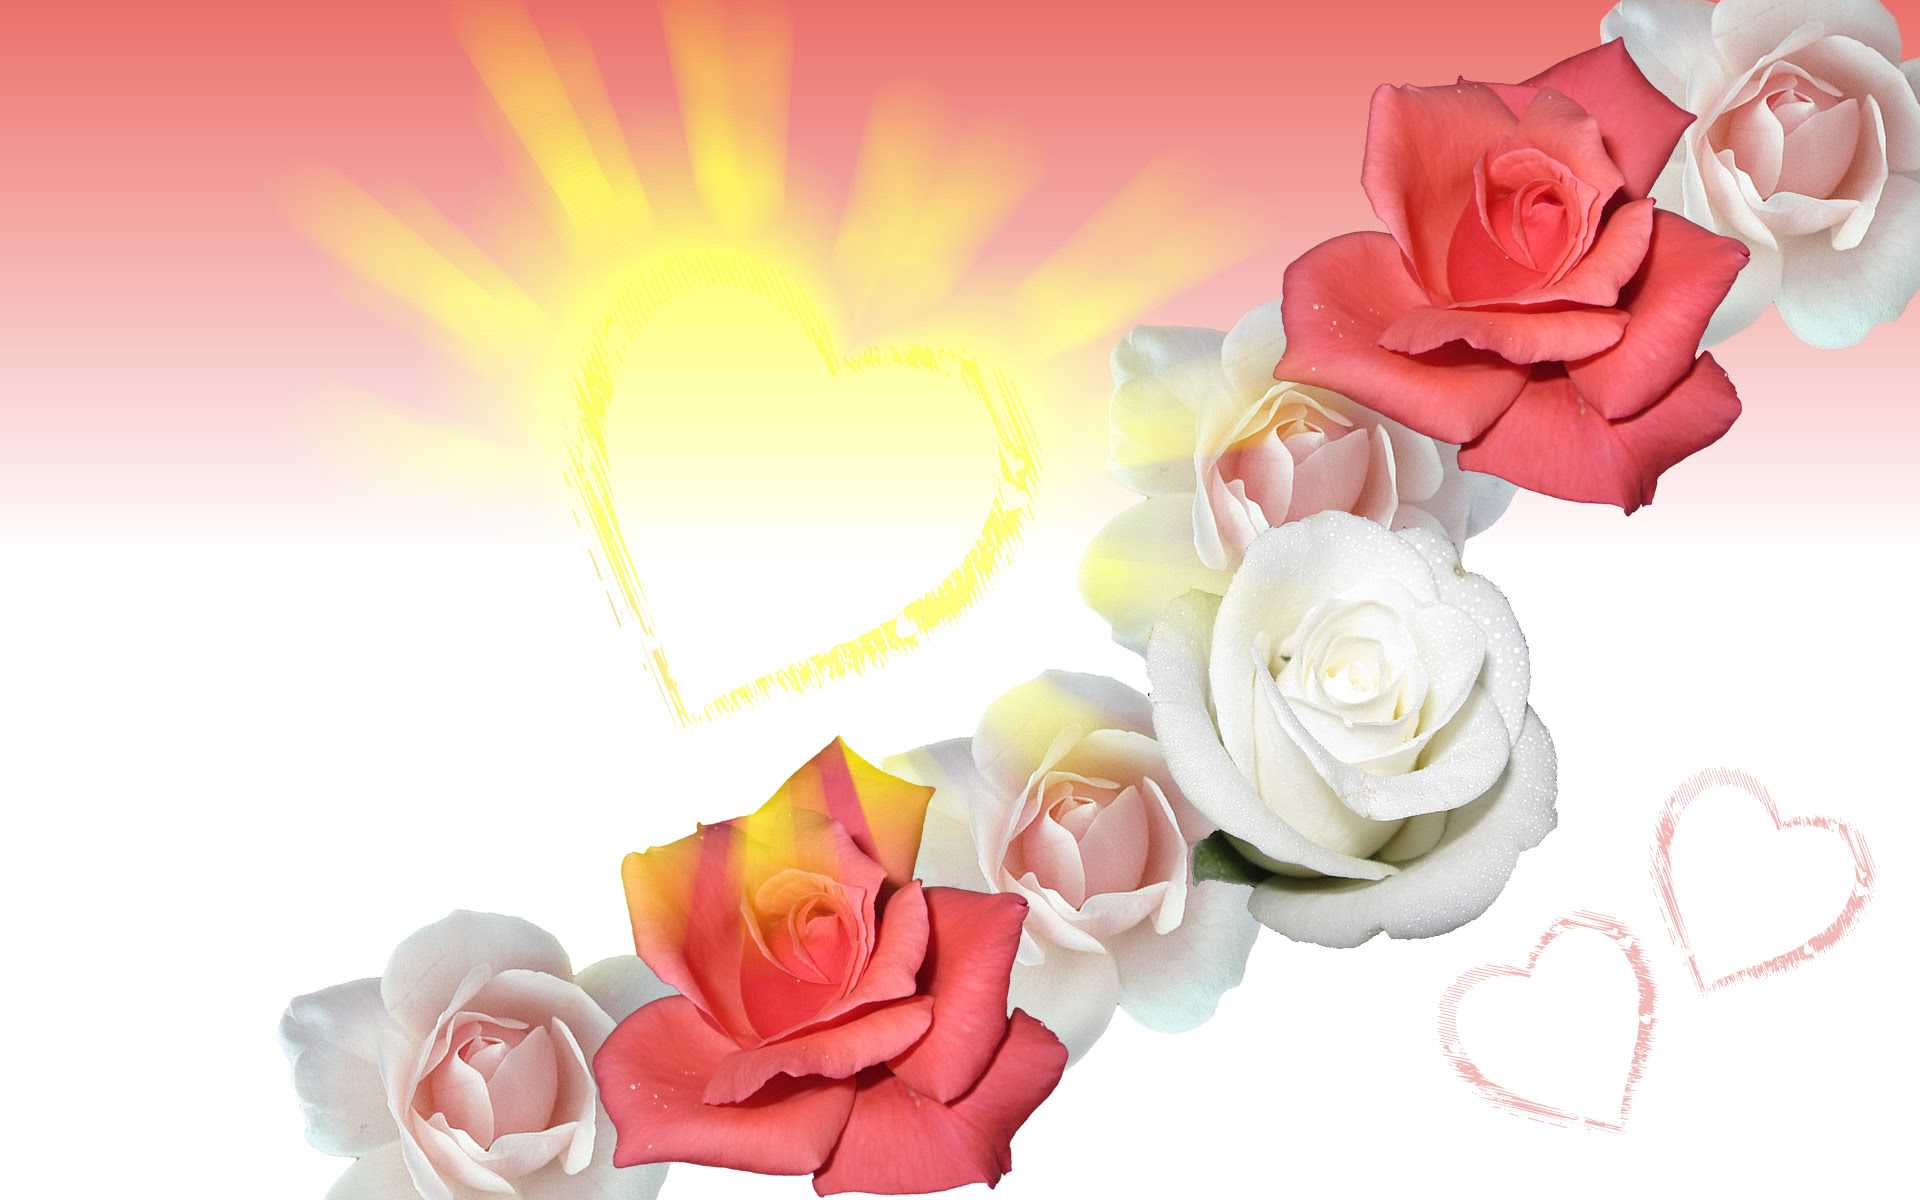 Flower rose with heart of God wallpaper All flower all nature are made by 